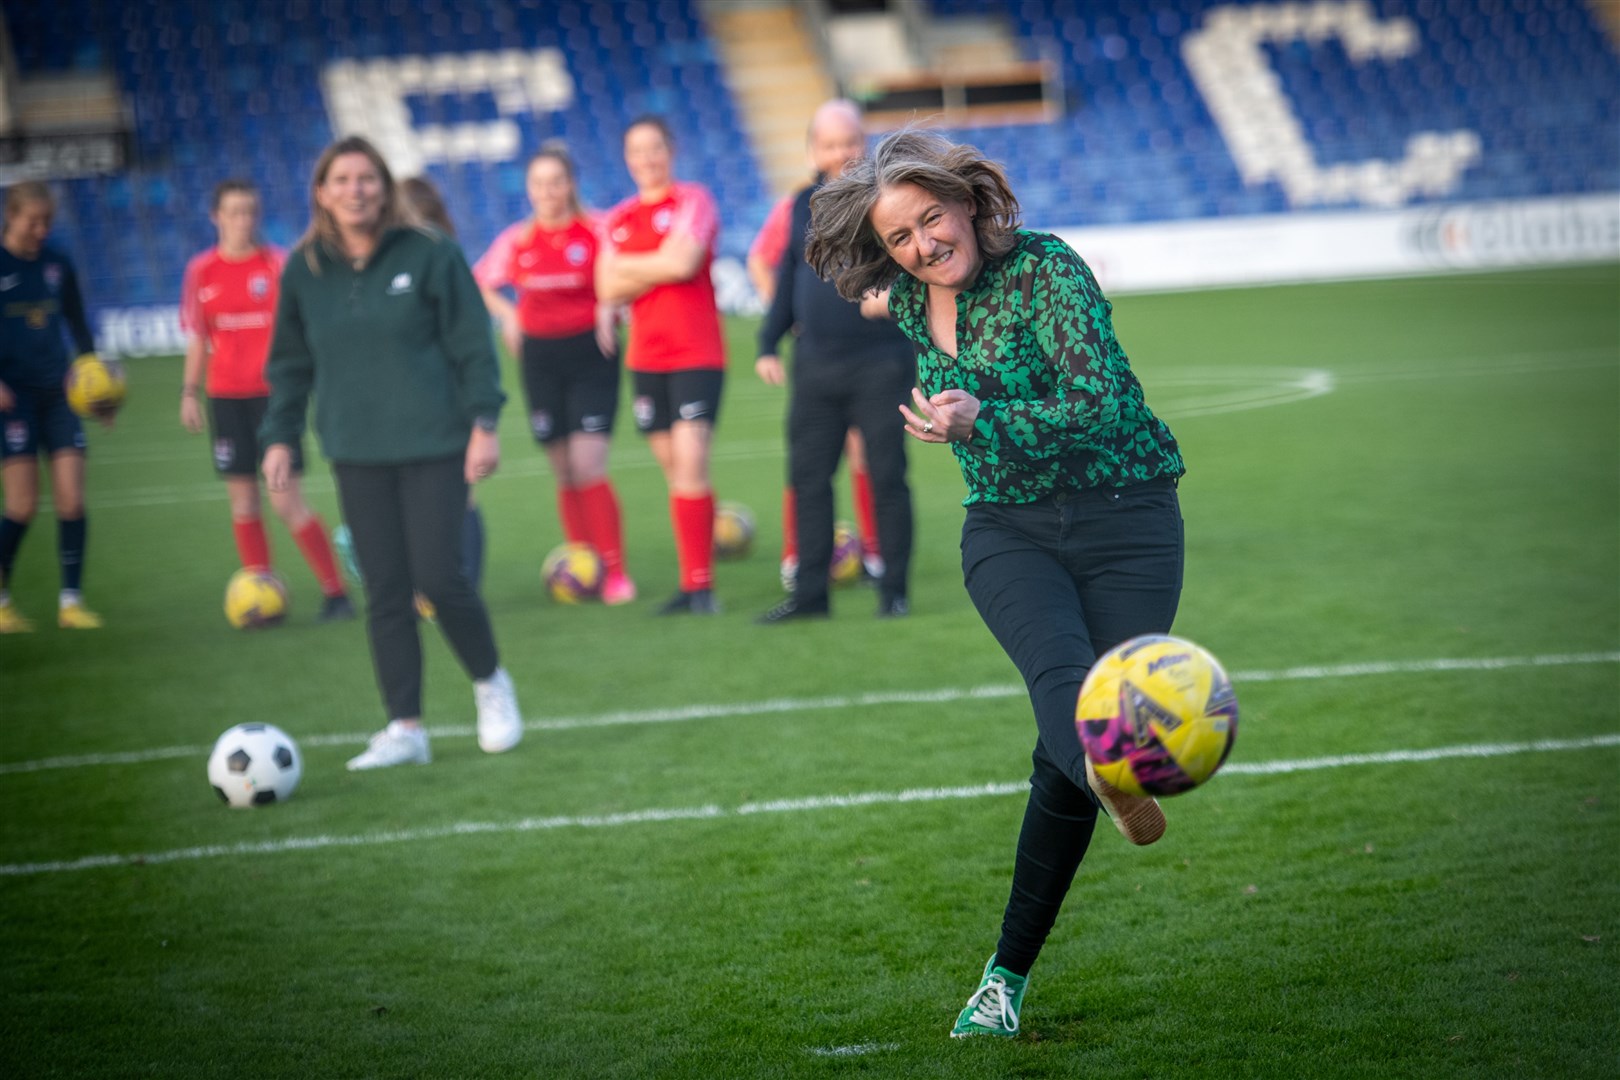 Sports minister Maree Todd shoots from the penalty spot at Ross County's stadium. Picture: Callum Mackay